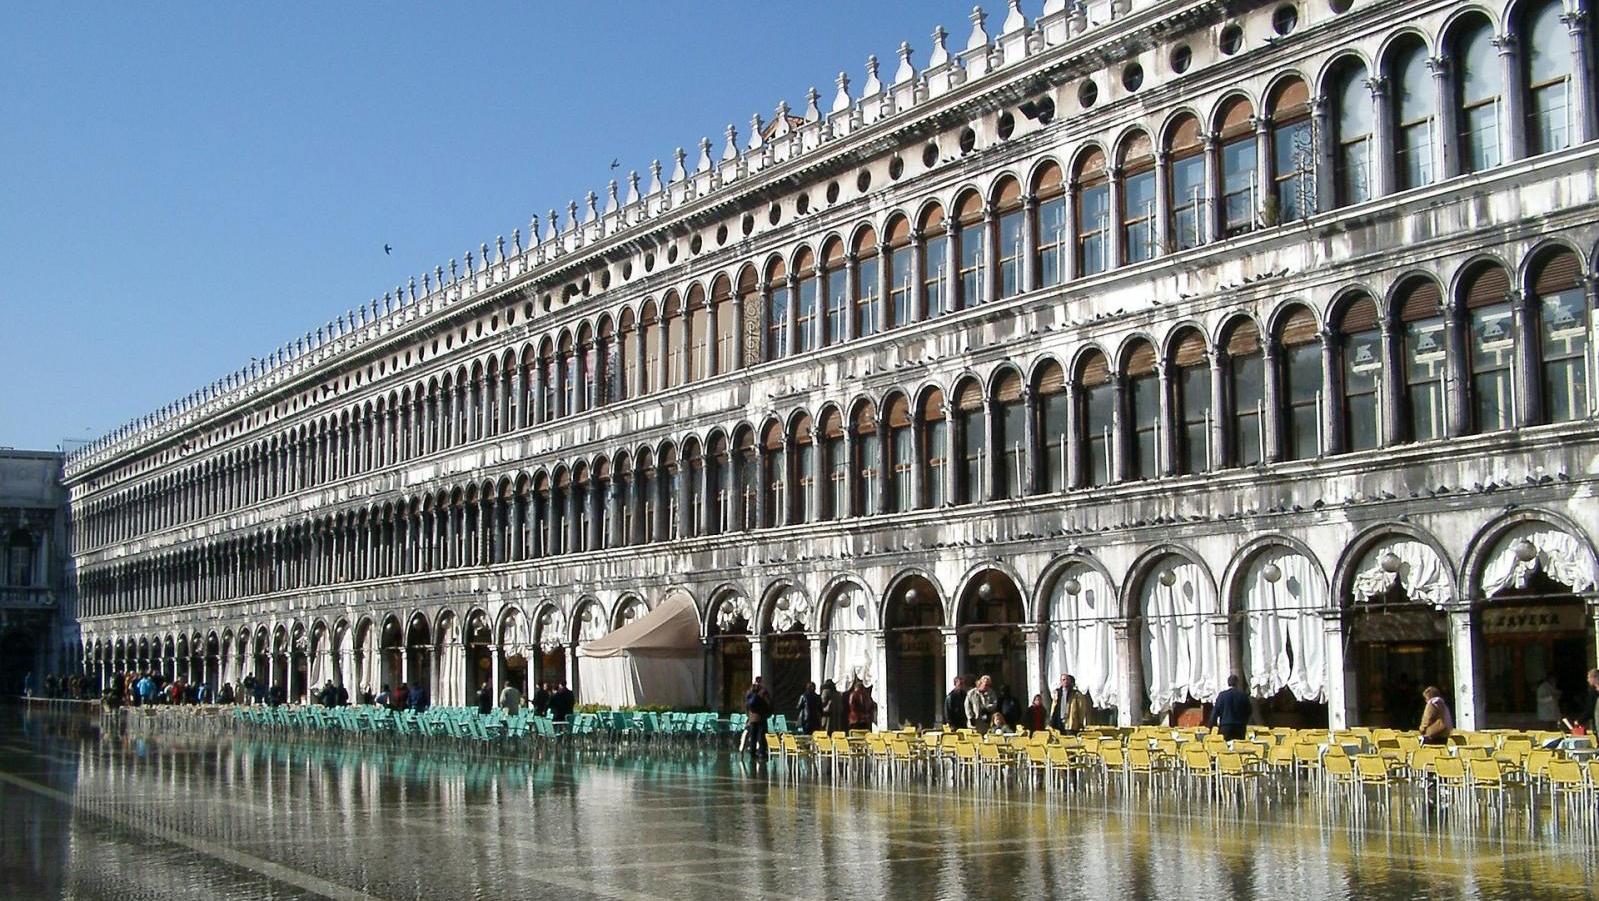   The Future of Venice: Between Disillusion and Fantasy